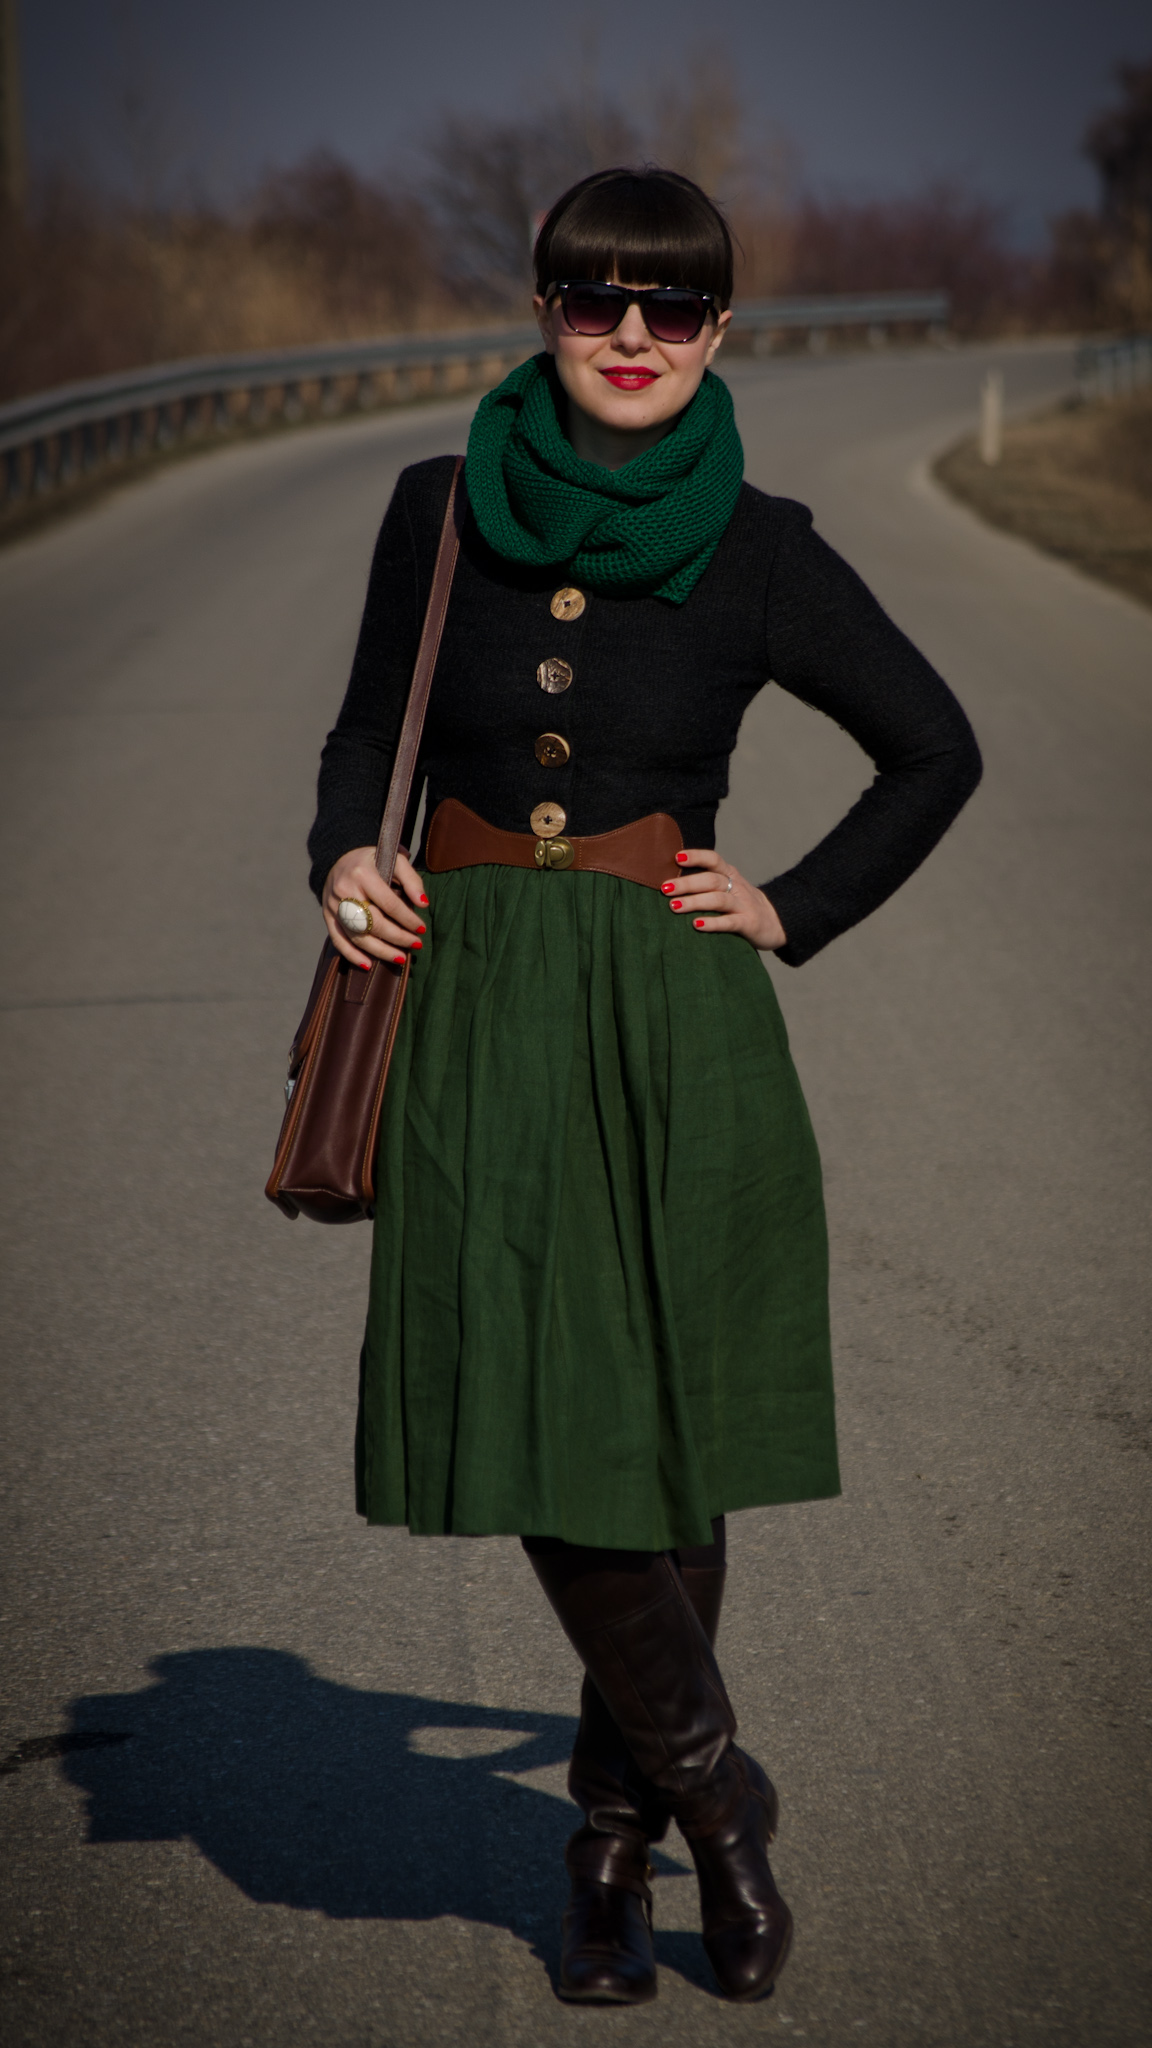 khaki midi dress thrifted brown boots green scarf army green outfit brown satchel bag